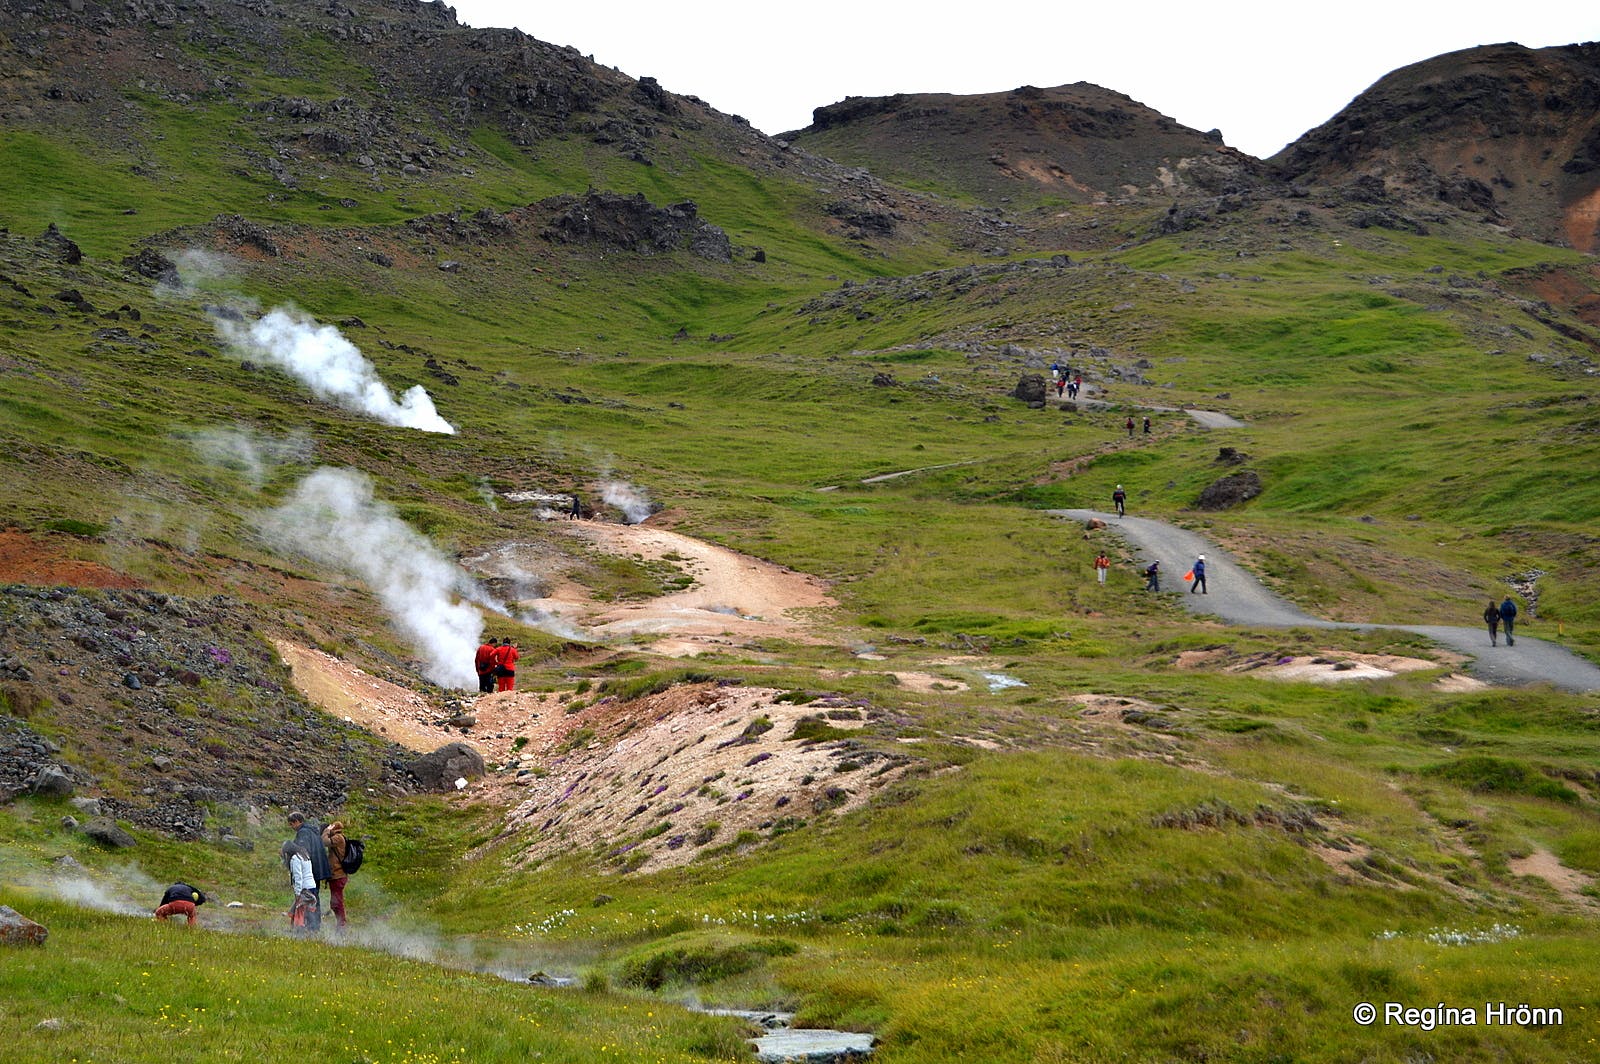 Reykjadalur is a beautiful valley littered with hot springs.